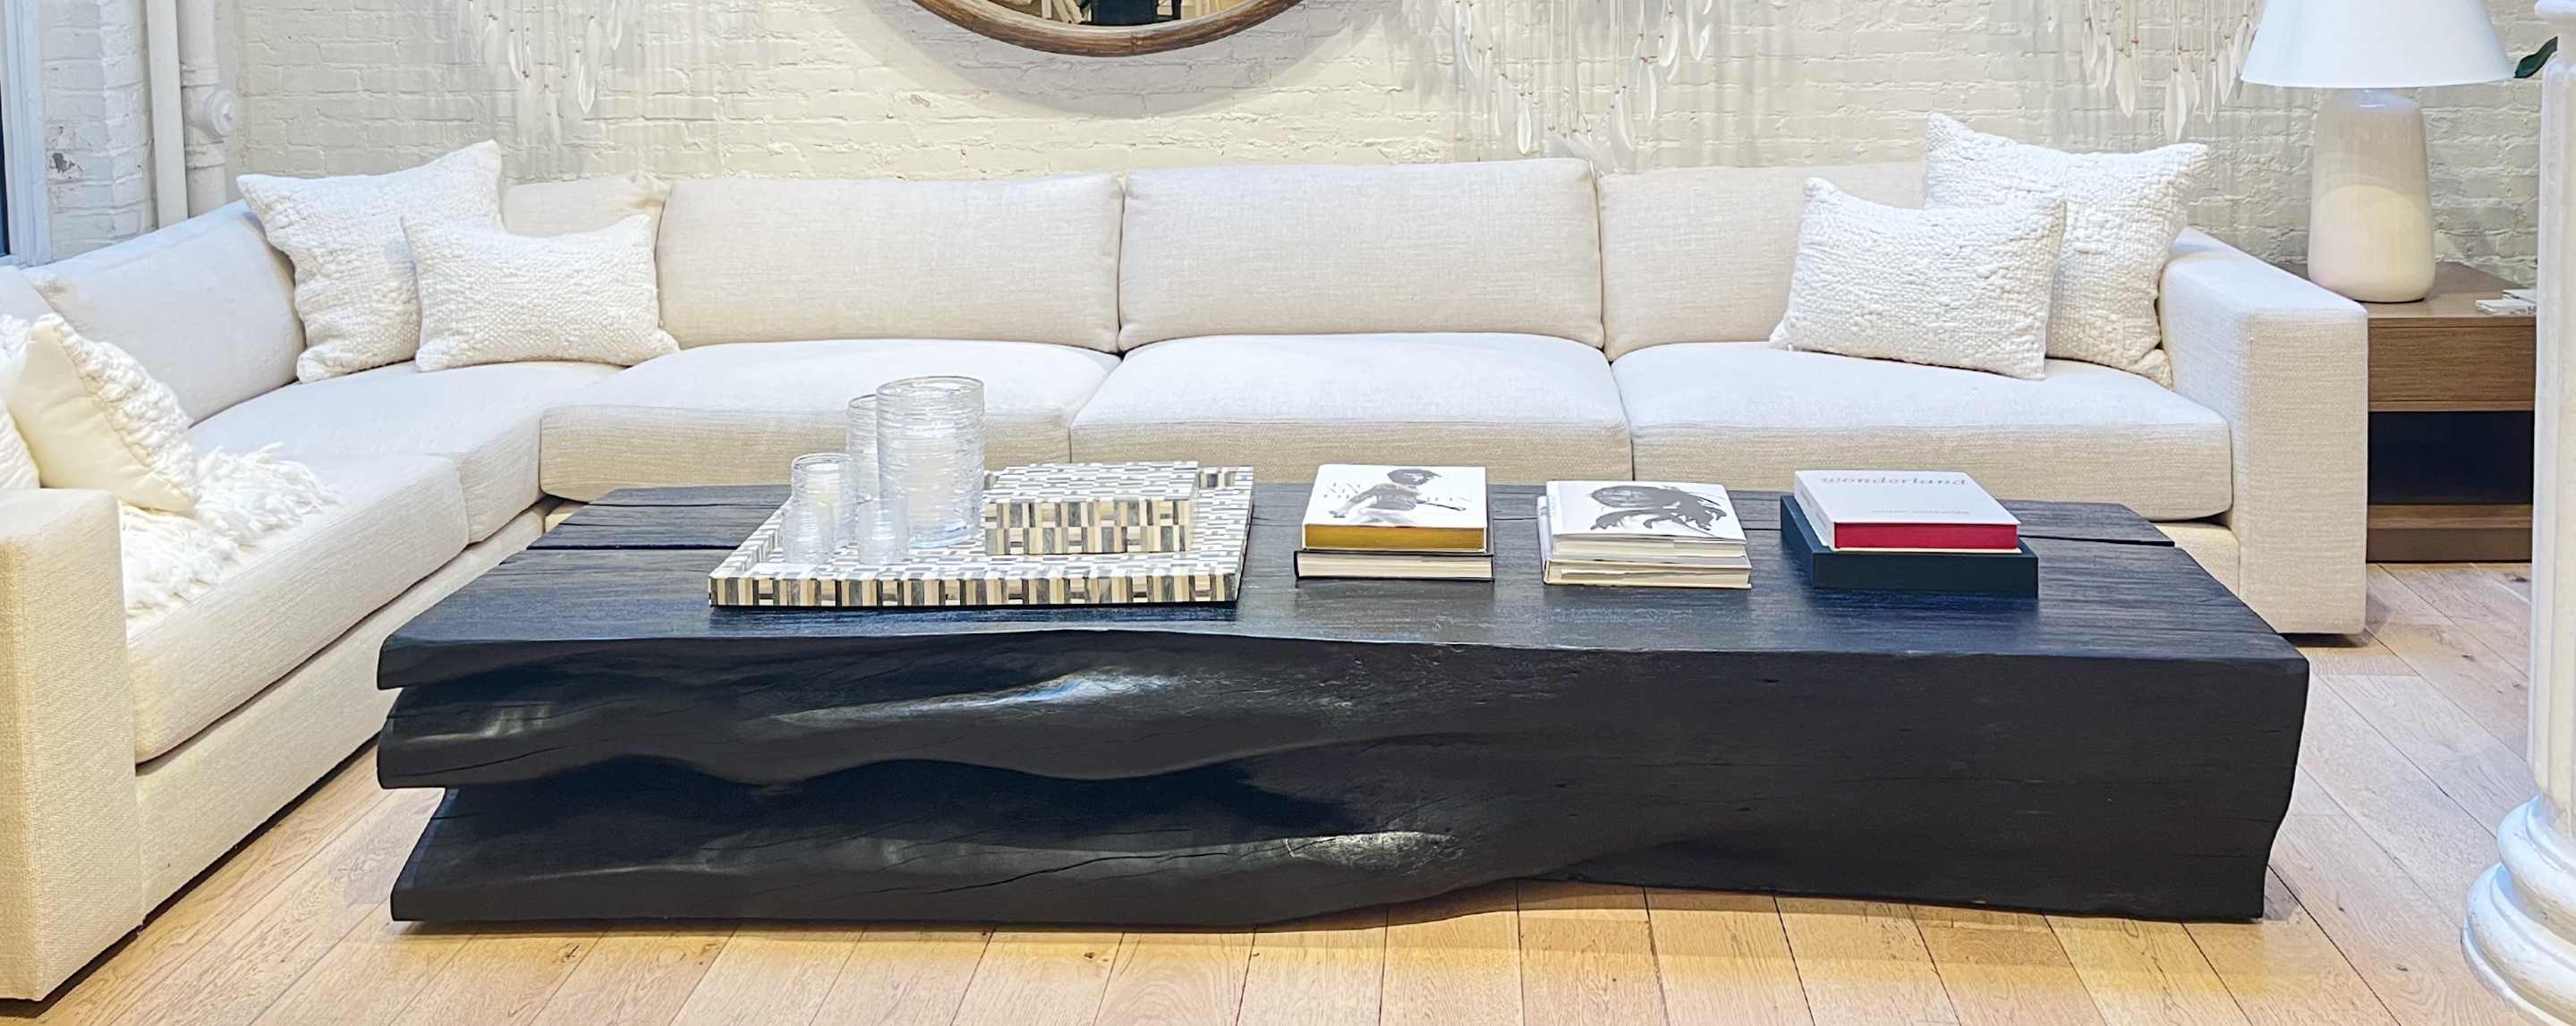 the blackened coffee table